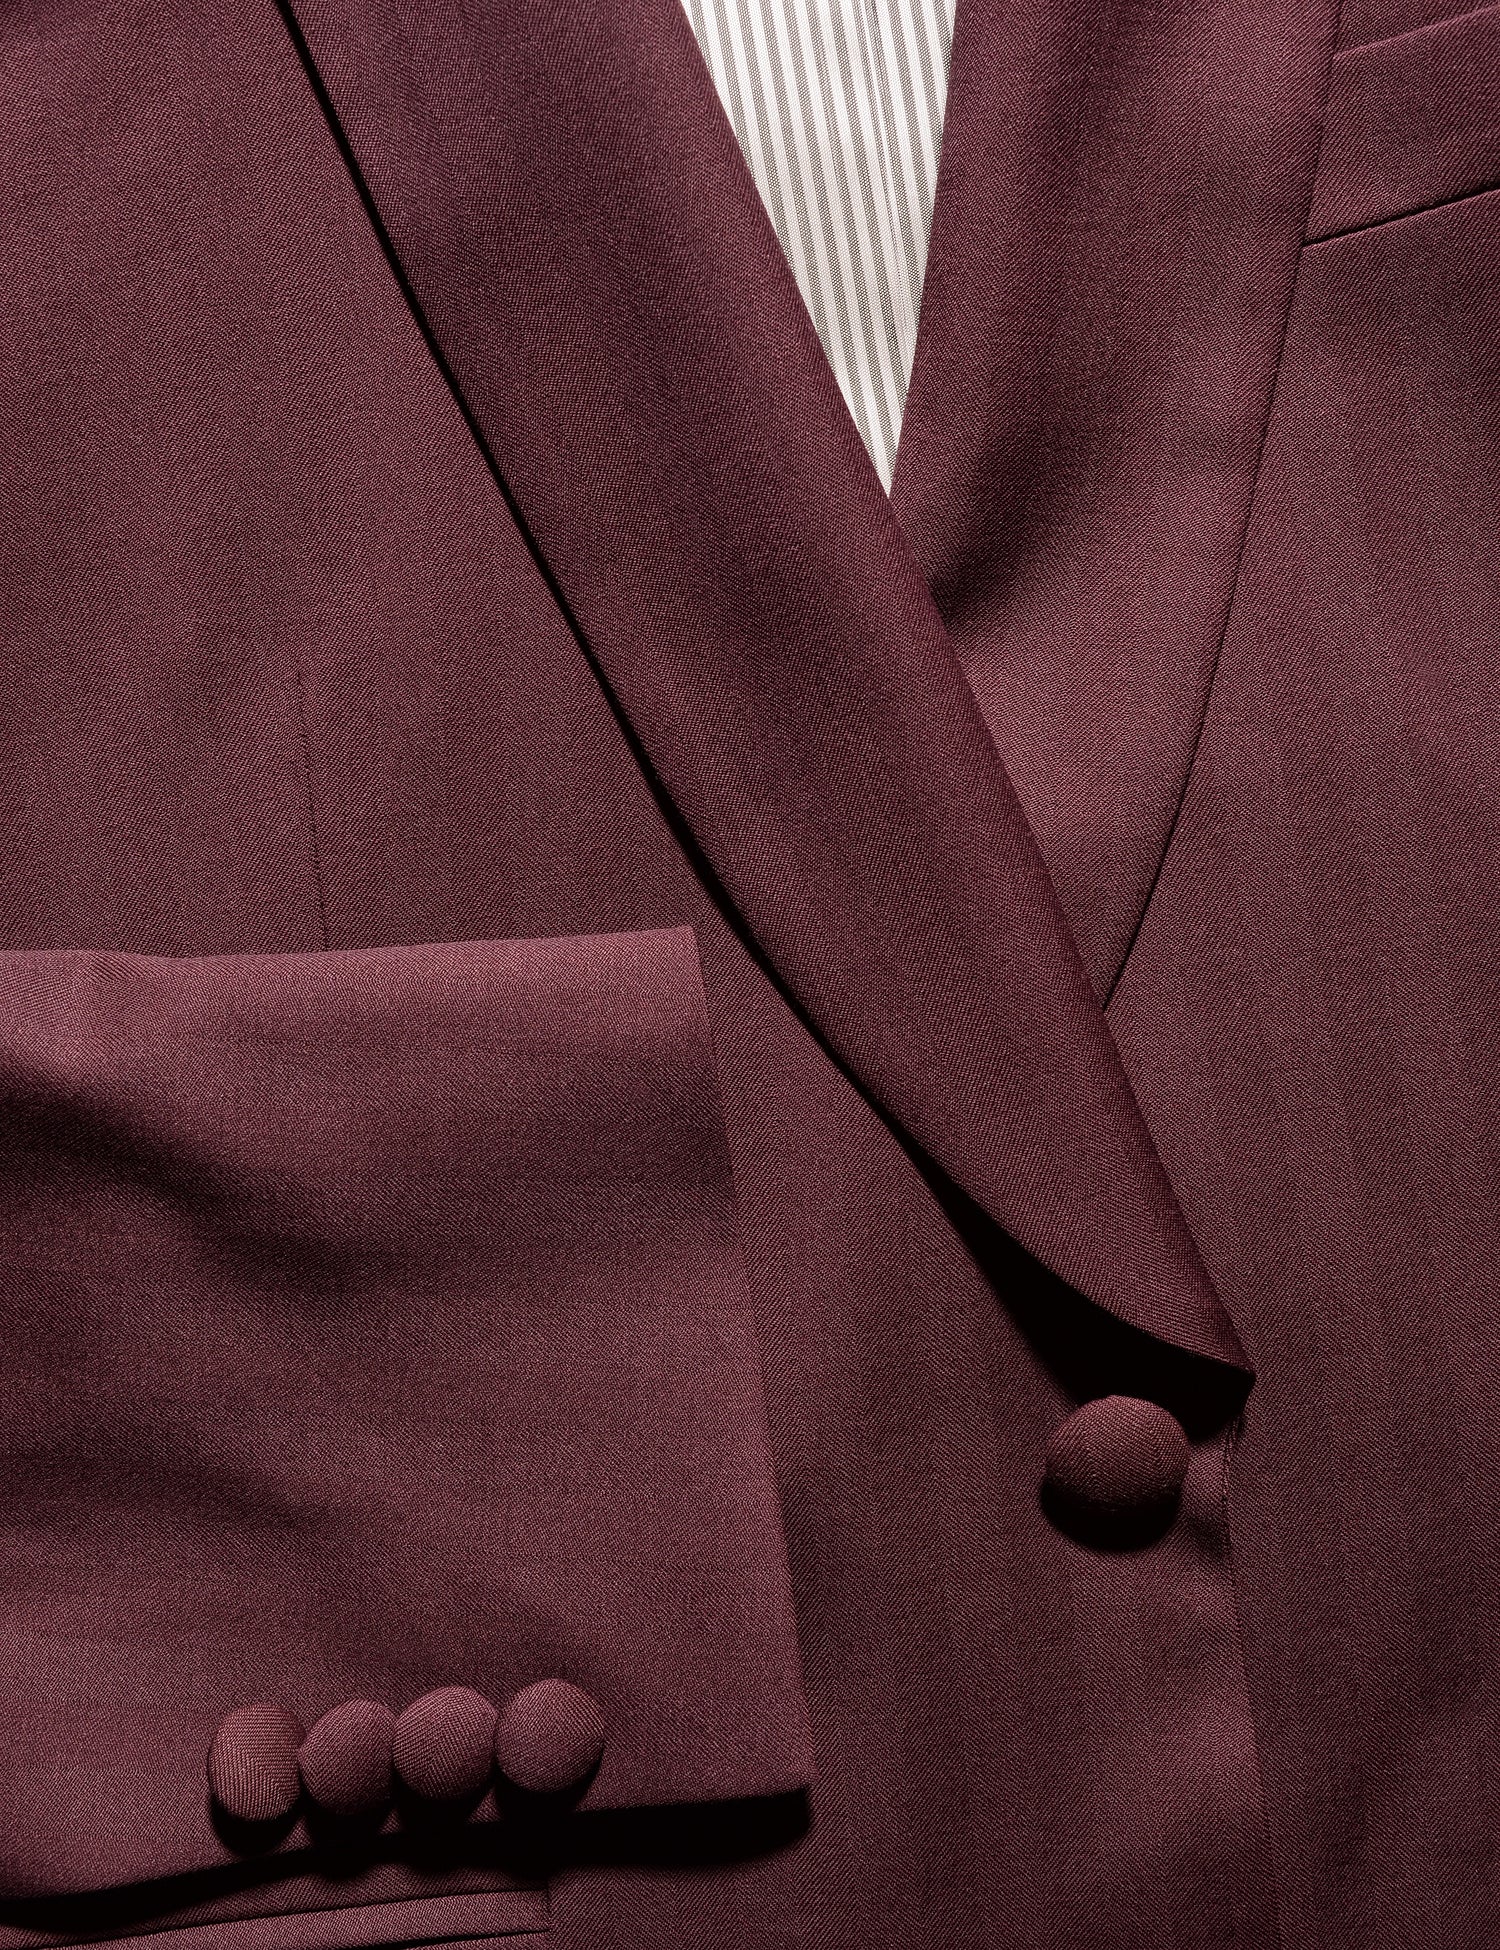 Detail shot of Brooklyn Tailors BKT50 Shawl Collar Dinner Jacket in Wool Herringbone - Syrah showing cuff, lapel, covered buttons, lining and fabric texture